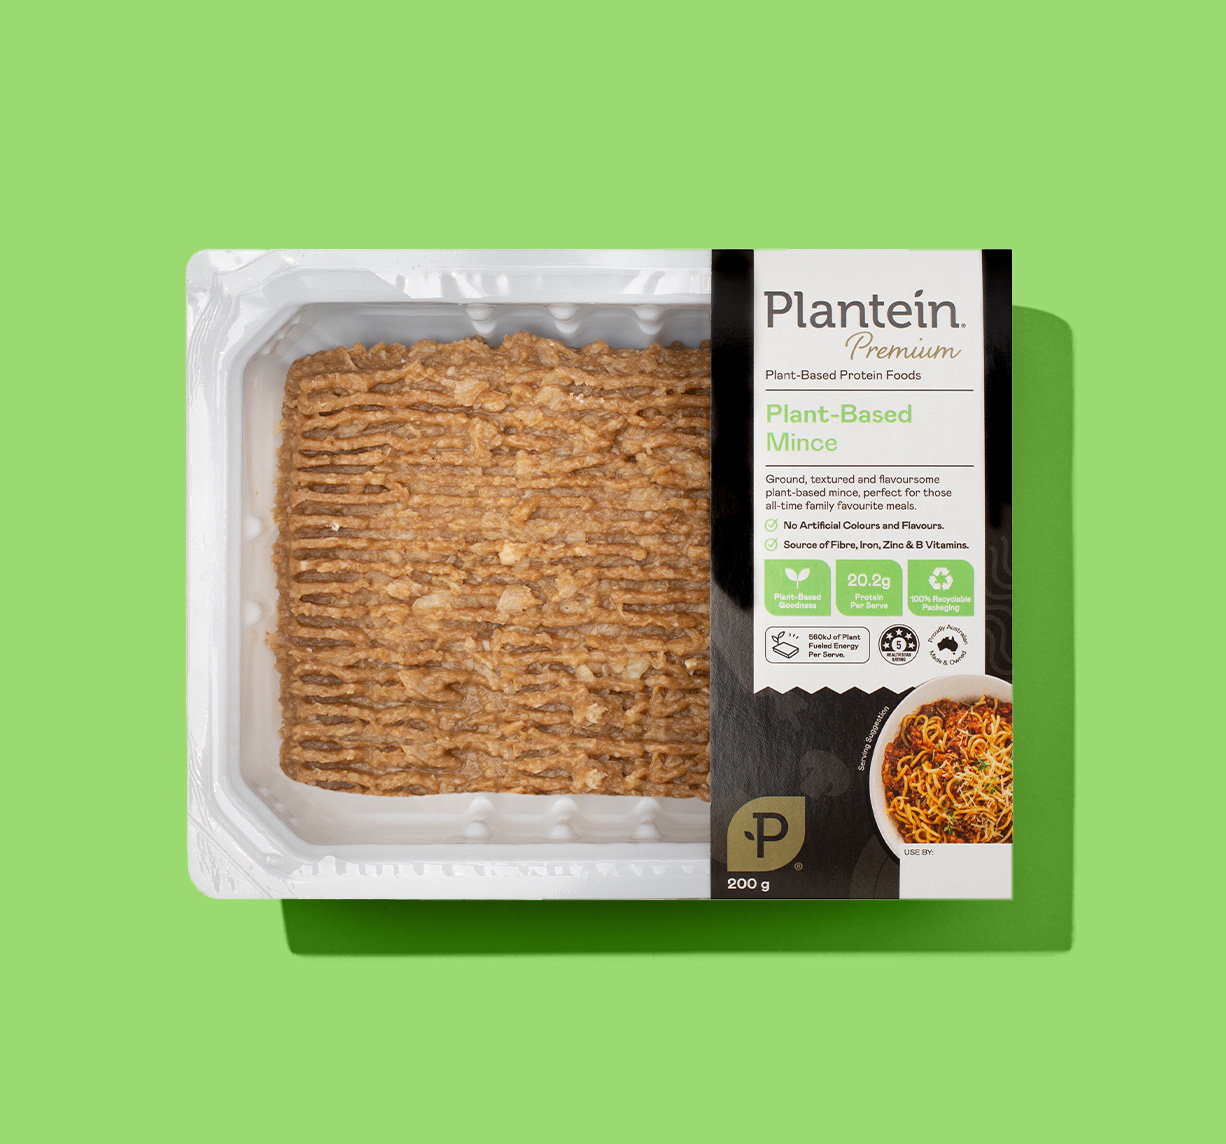 Plantein plant-based mince in packaging